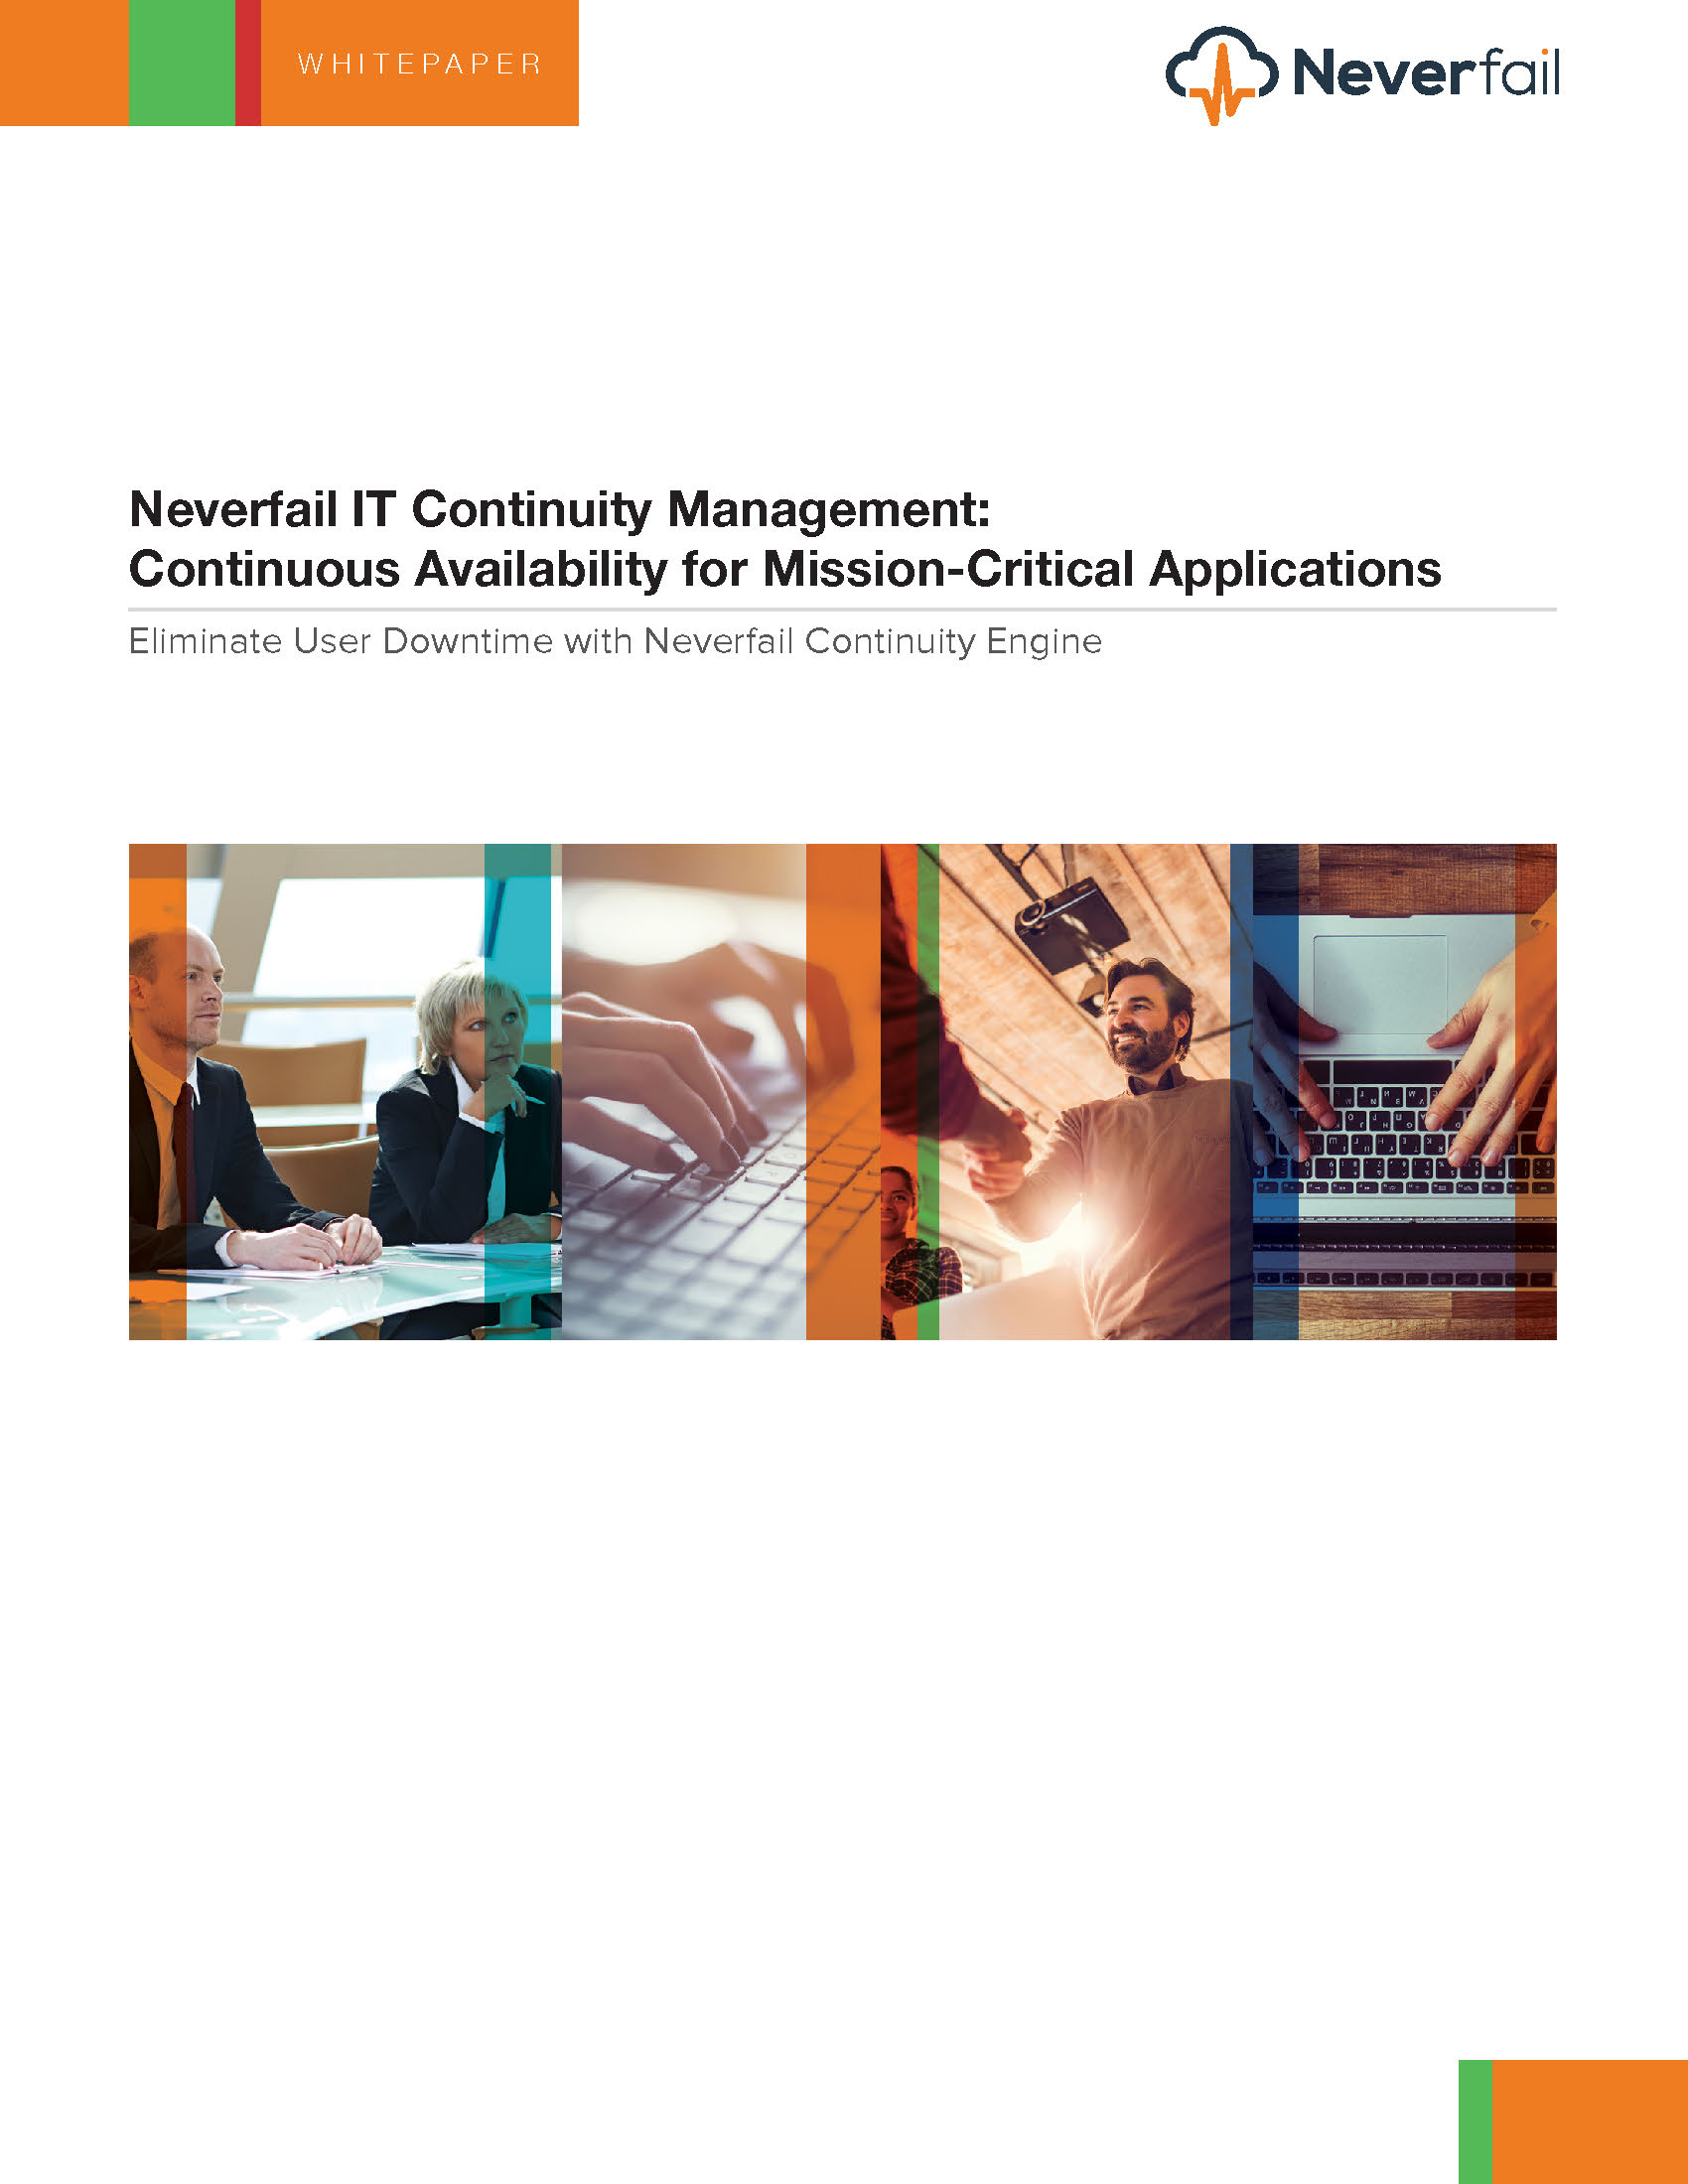 White paper cover for Neverfail's IT Continuity Management White Paper